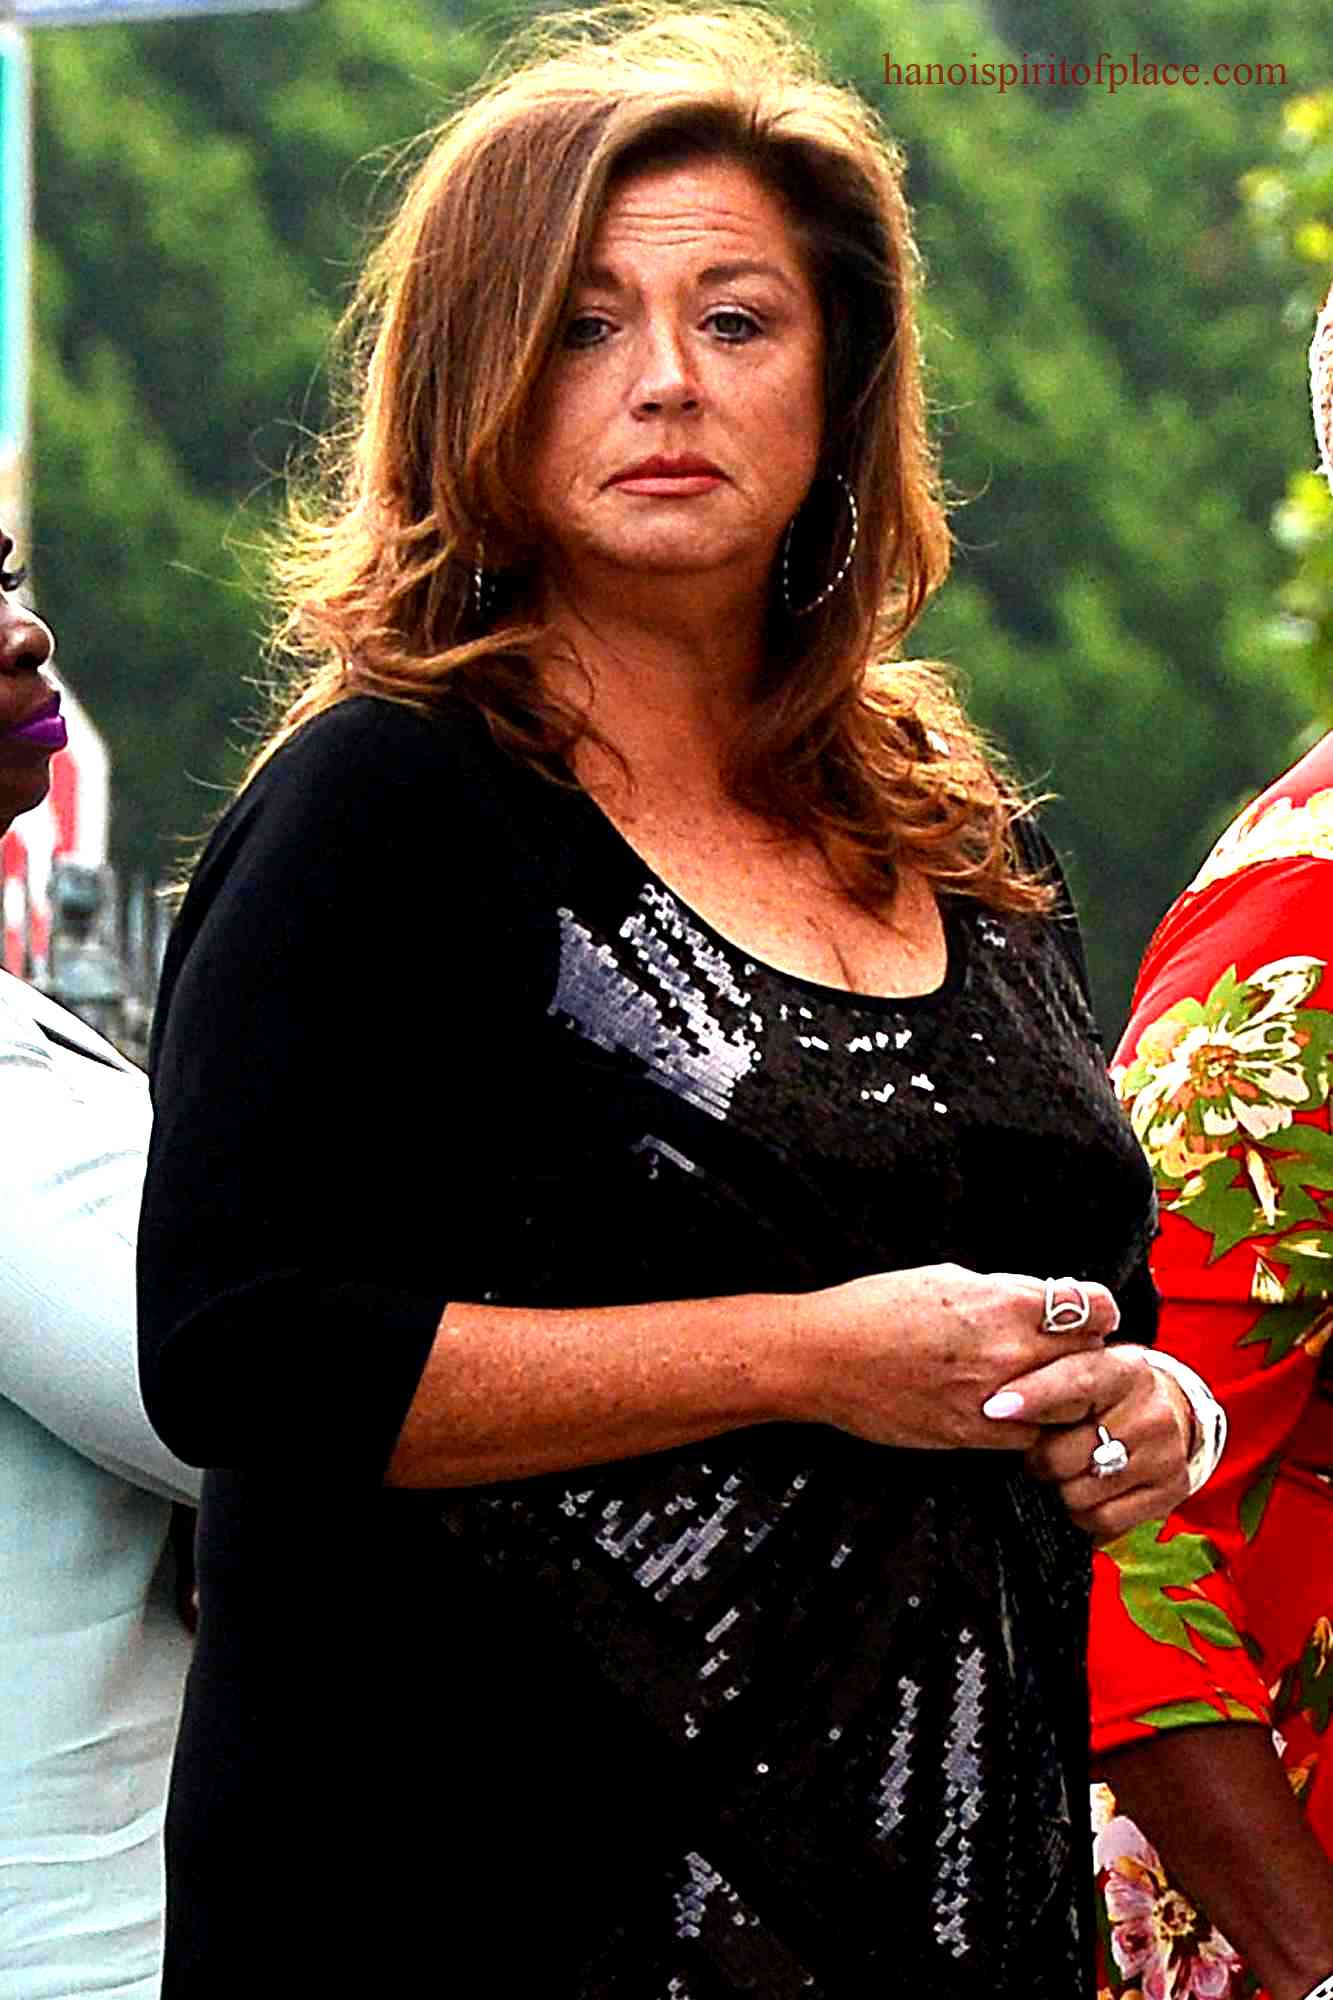 Brief overview of Abby Lee Miller's rise to fame